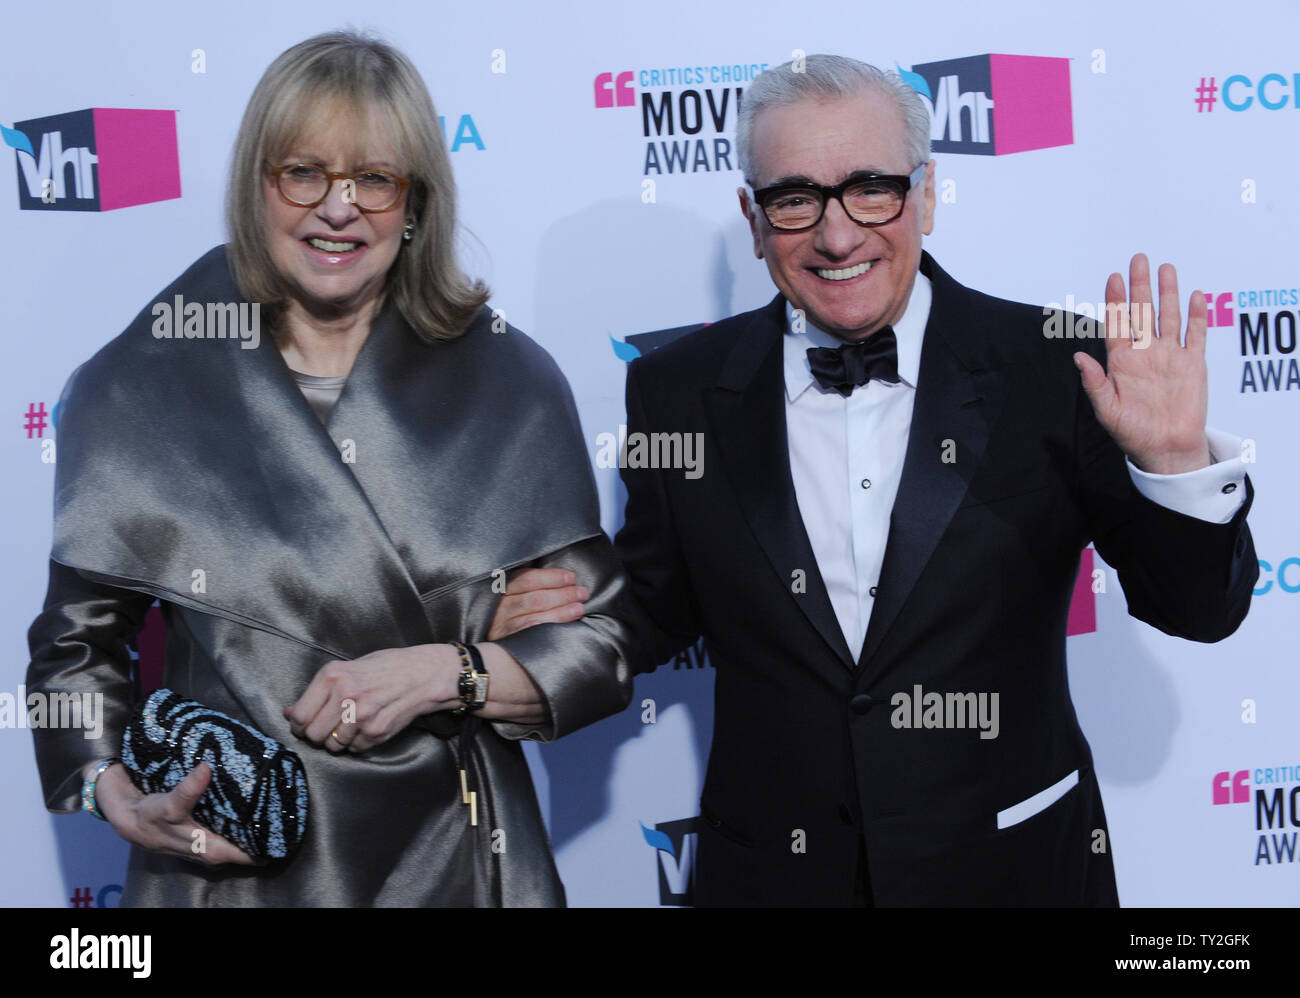 Director Martin Scorsese and his wife Helen Morris arrive for the 17th annual Critics Choice Movie Awards at the Hollywood Palladium in Los Angeles on January 12, 2012.  UPI/Jim Ruymen Stock Photo